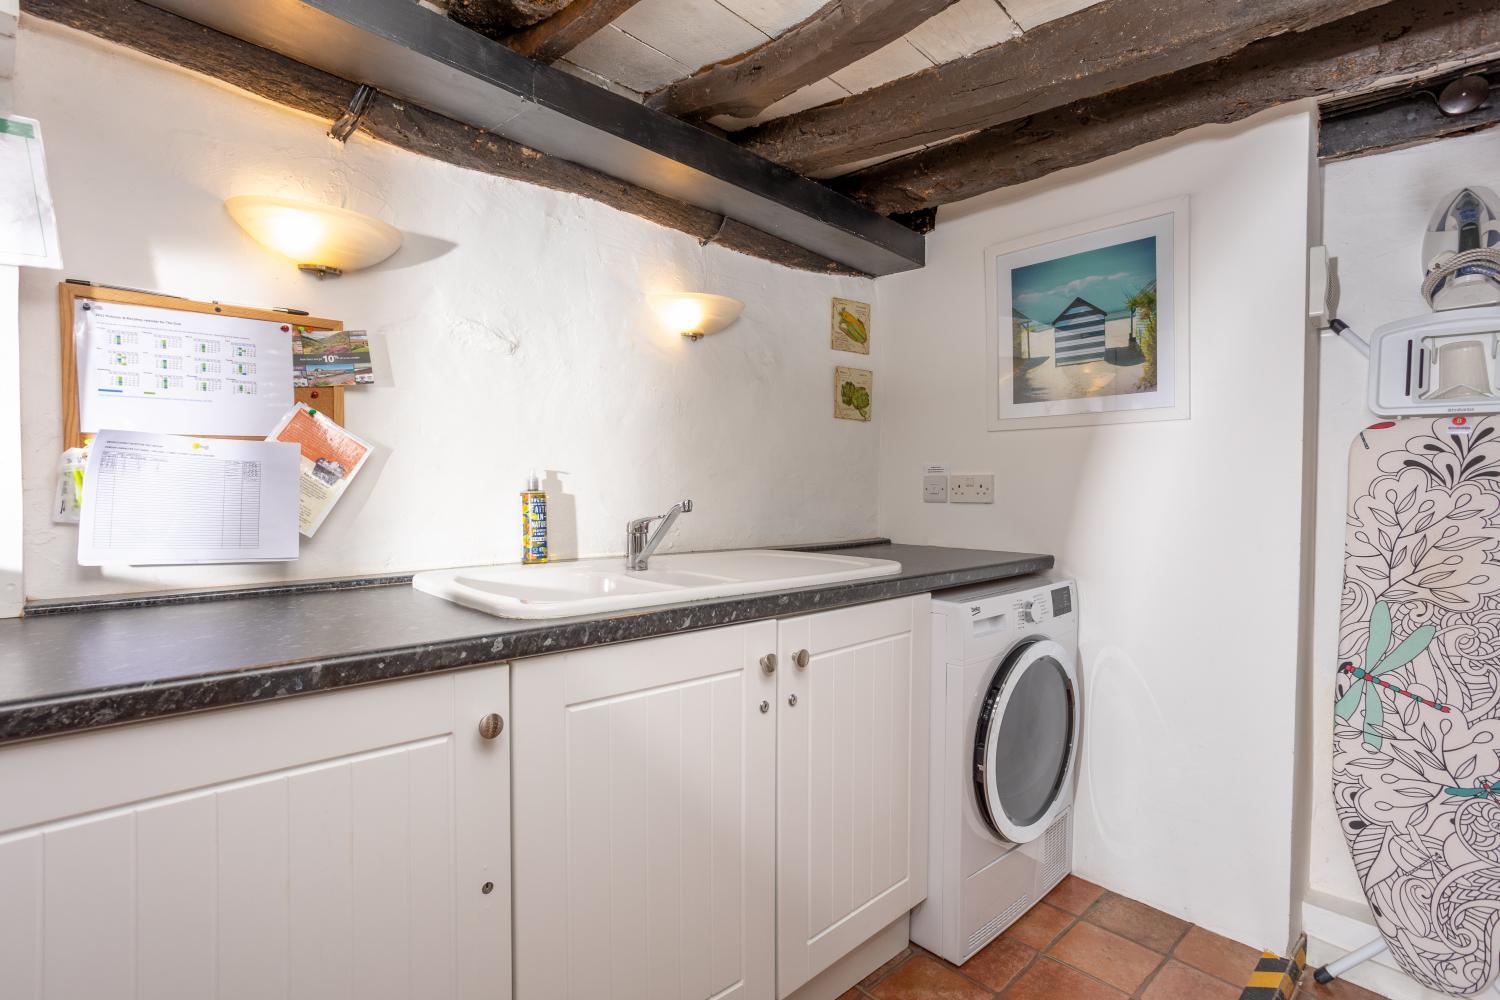 The utility room has a tumble drier, iron and ironing board and WC